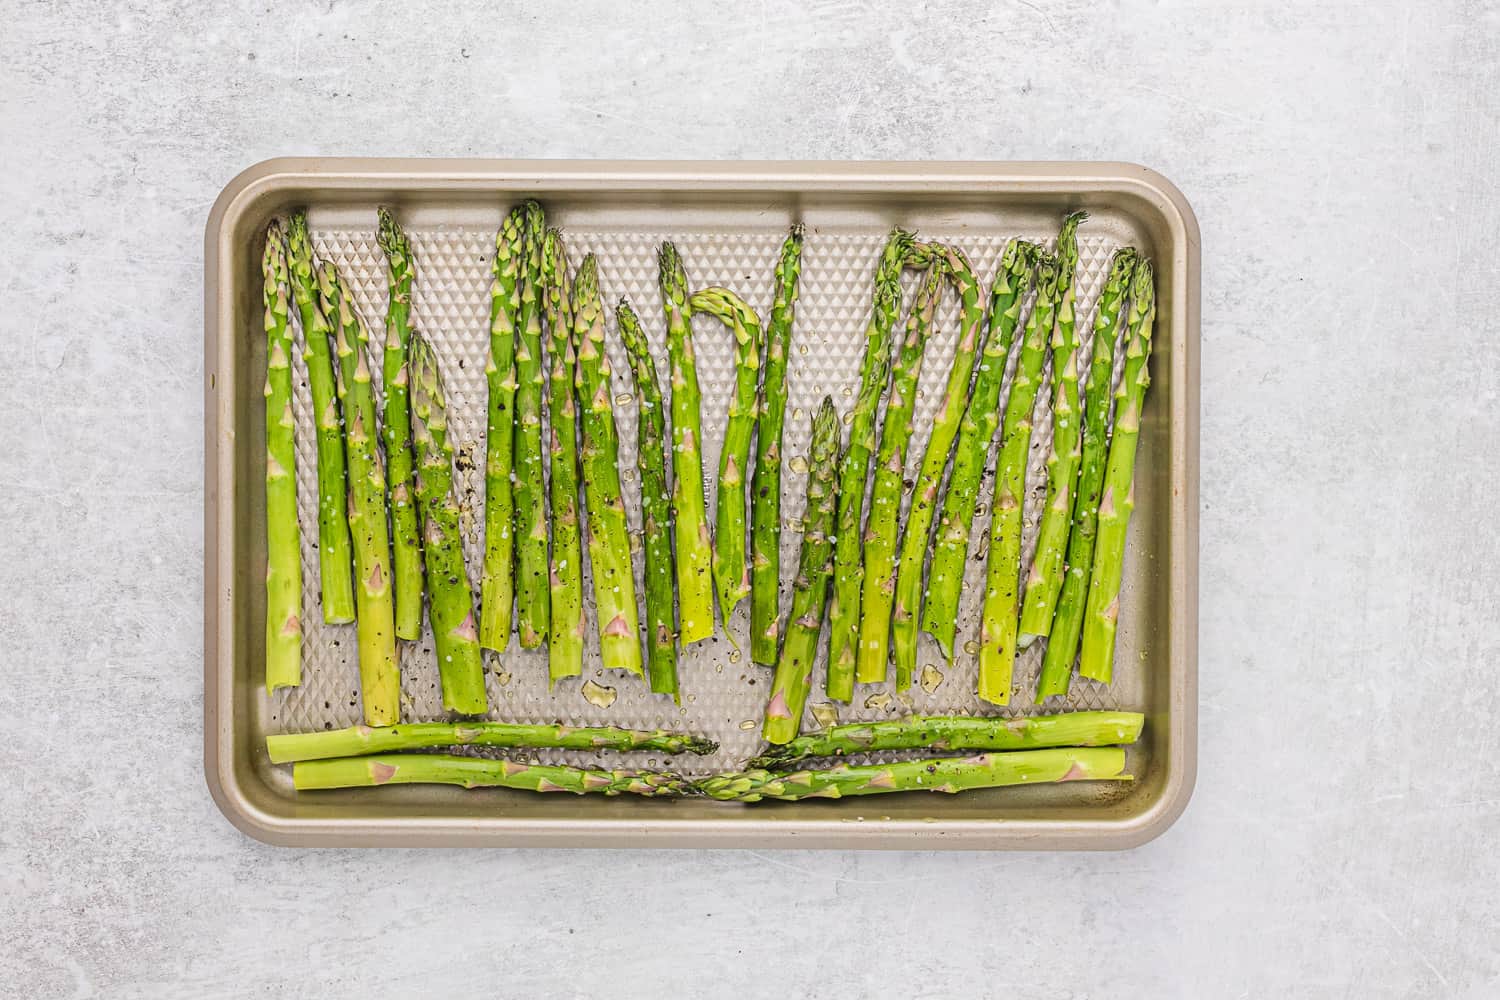 Unroasted asparagus on a sheet pan.